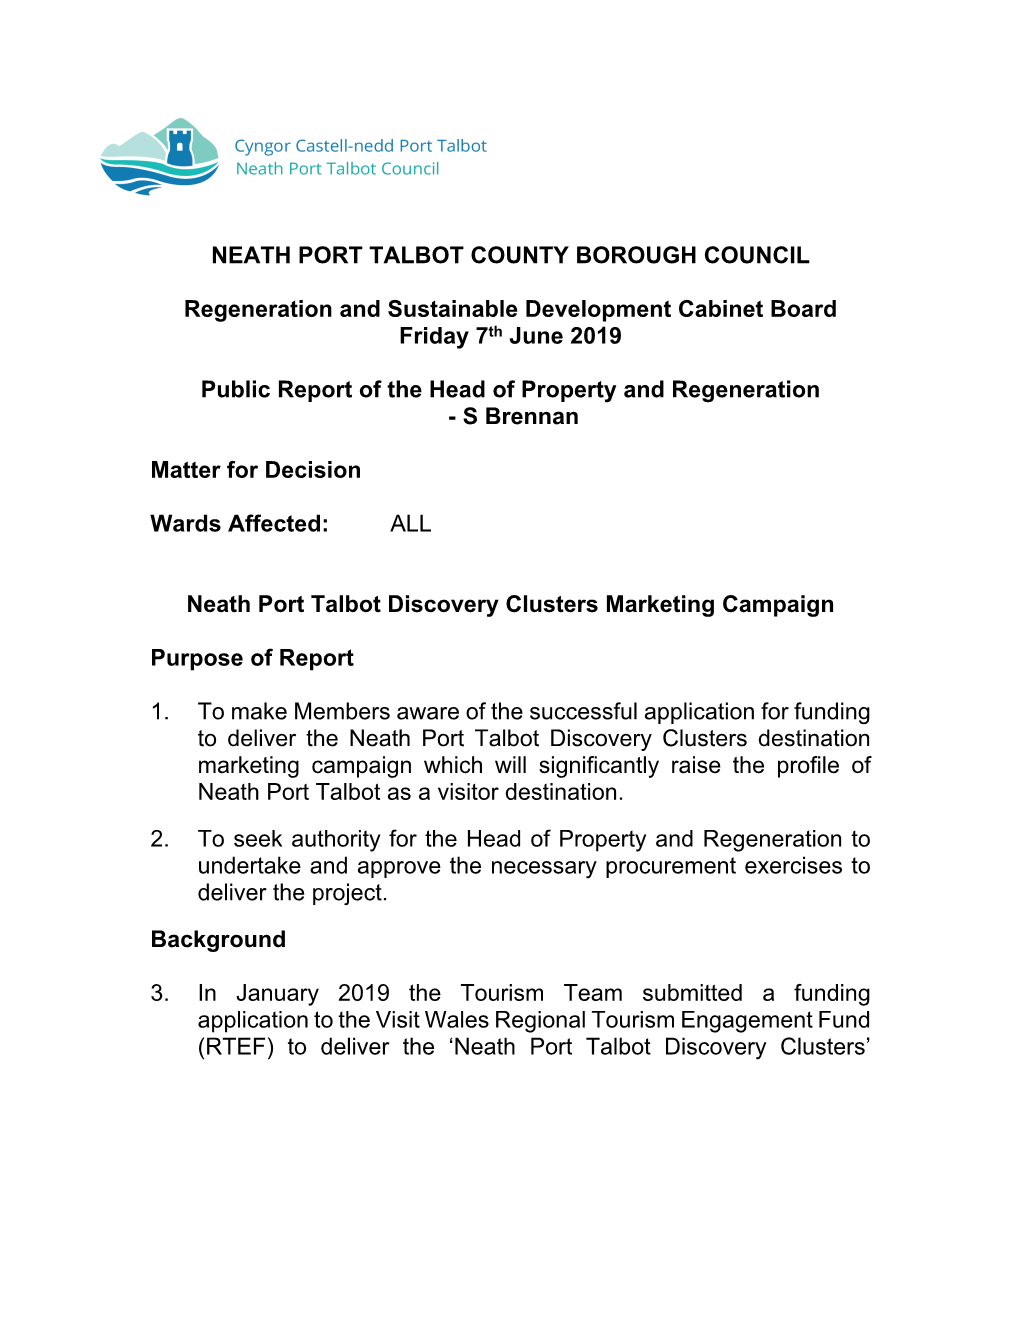 Neath Port Talbot Discovery Clusters Marketing Campaign PDF 103 KB